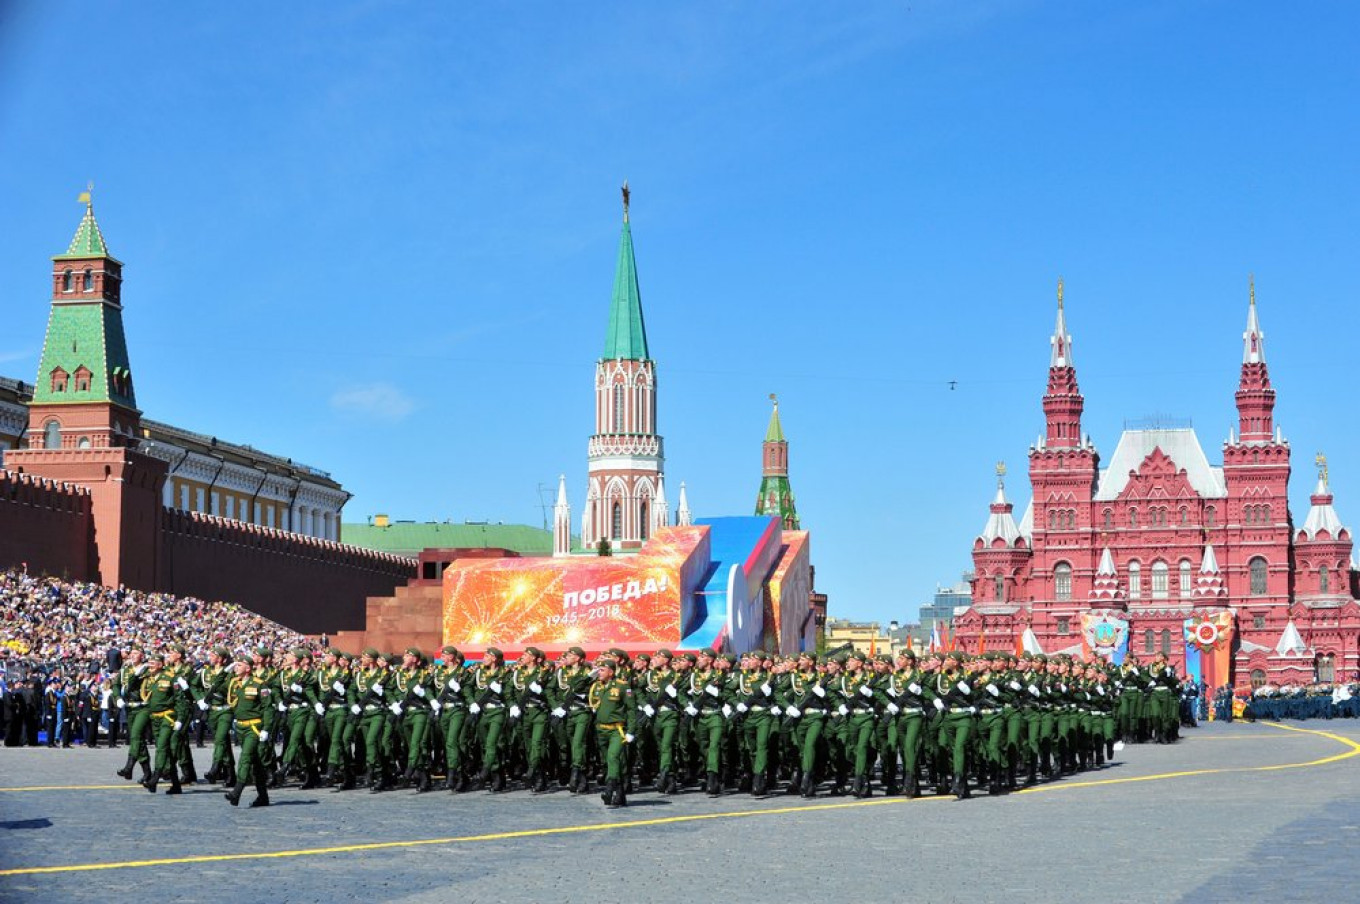 Foreign Dignitaries Not Invited to Russia’s WWII Victory Parade – Kremlin